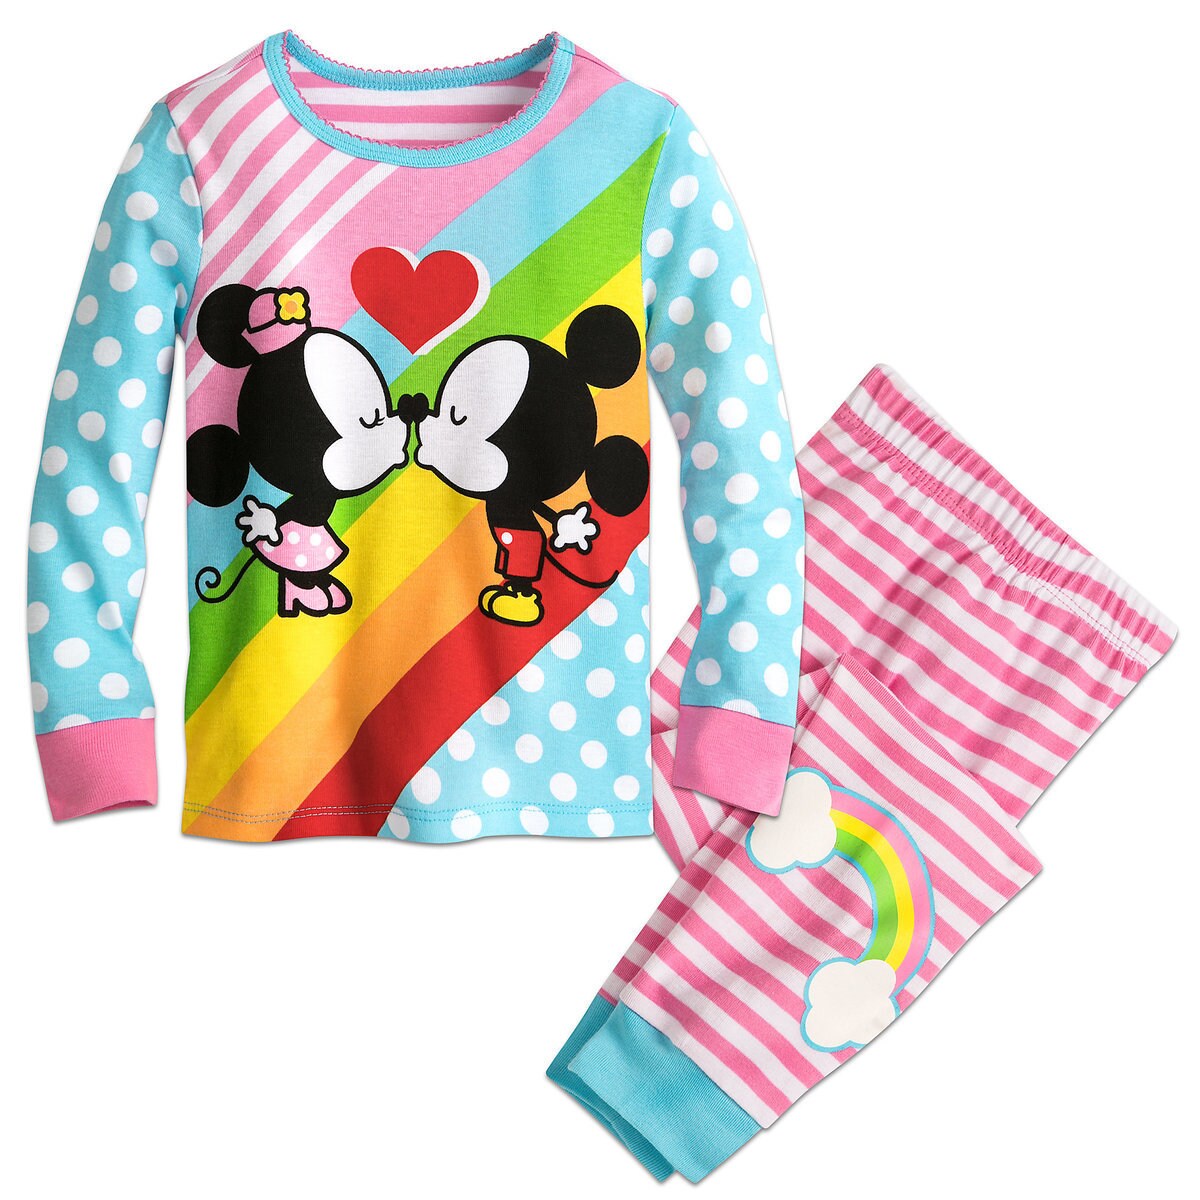 Mickey and Minnie Mouse Kiss PJ PALS for Girls